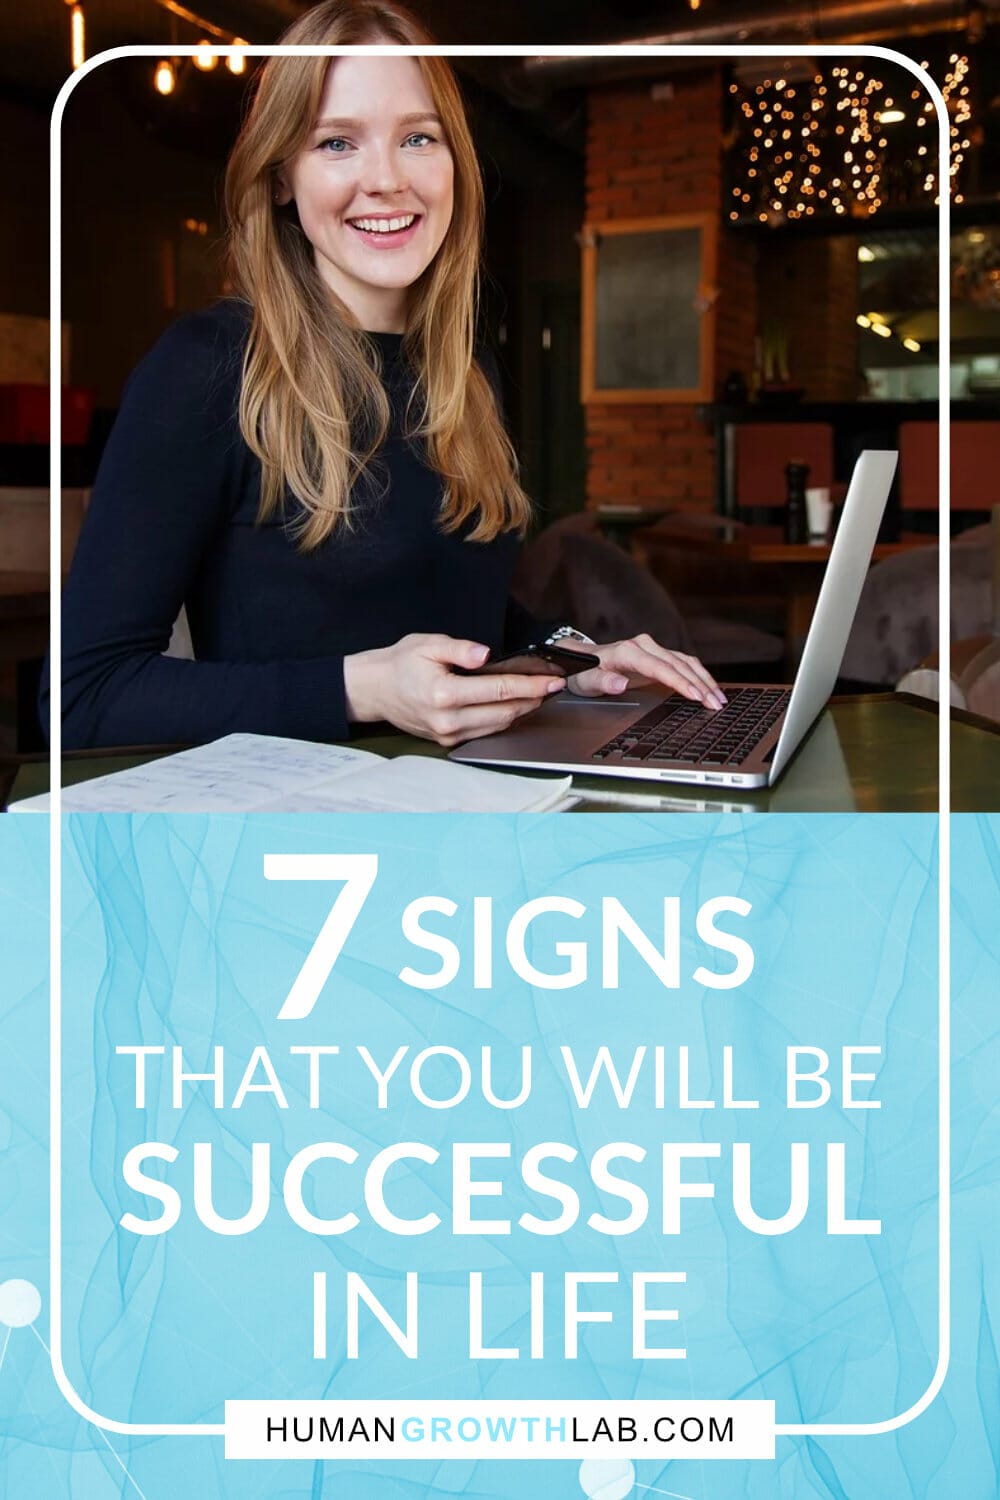 7 Signs that you will be successful in life via @humangrowthlab